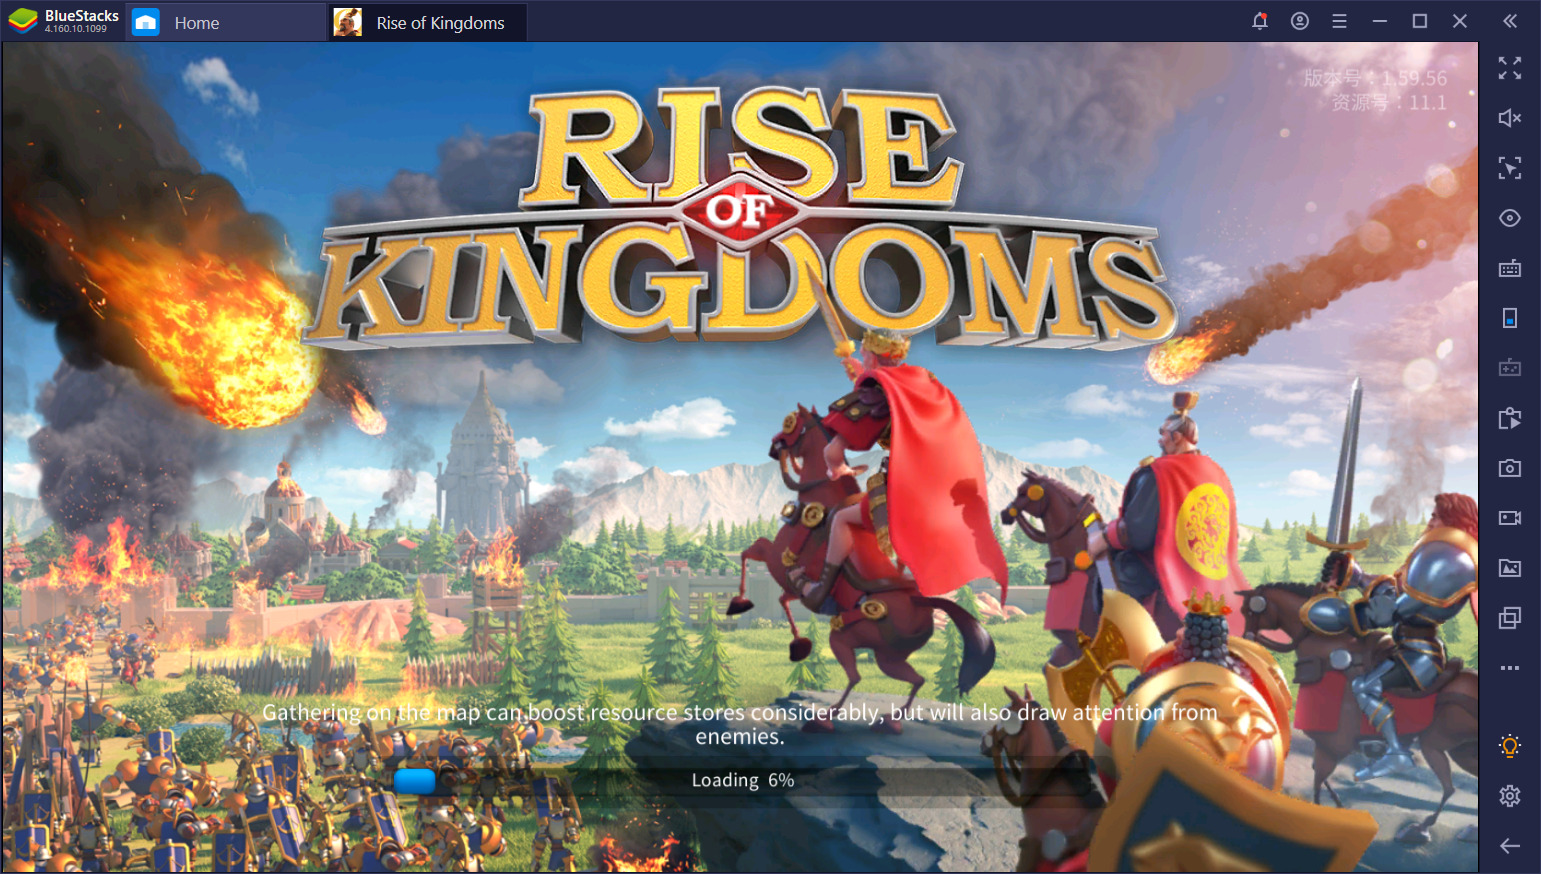 A Beginner's Know-all Guide to Rise of Kingdoms on PC